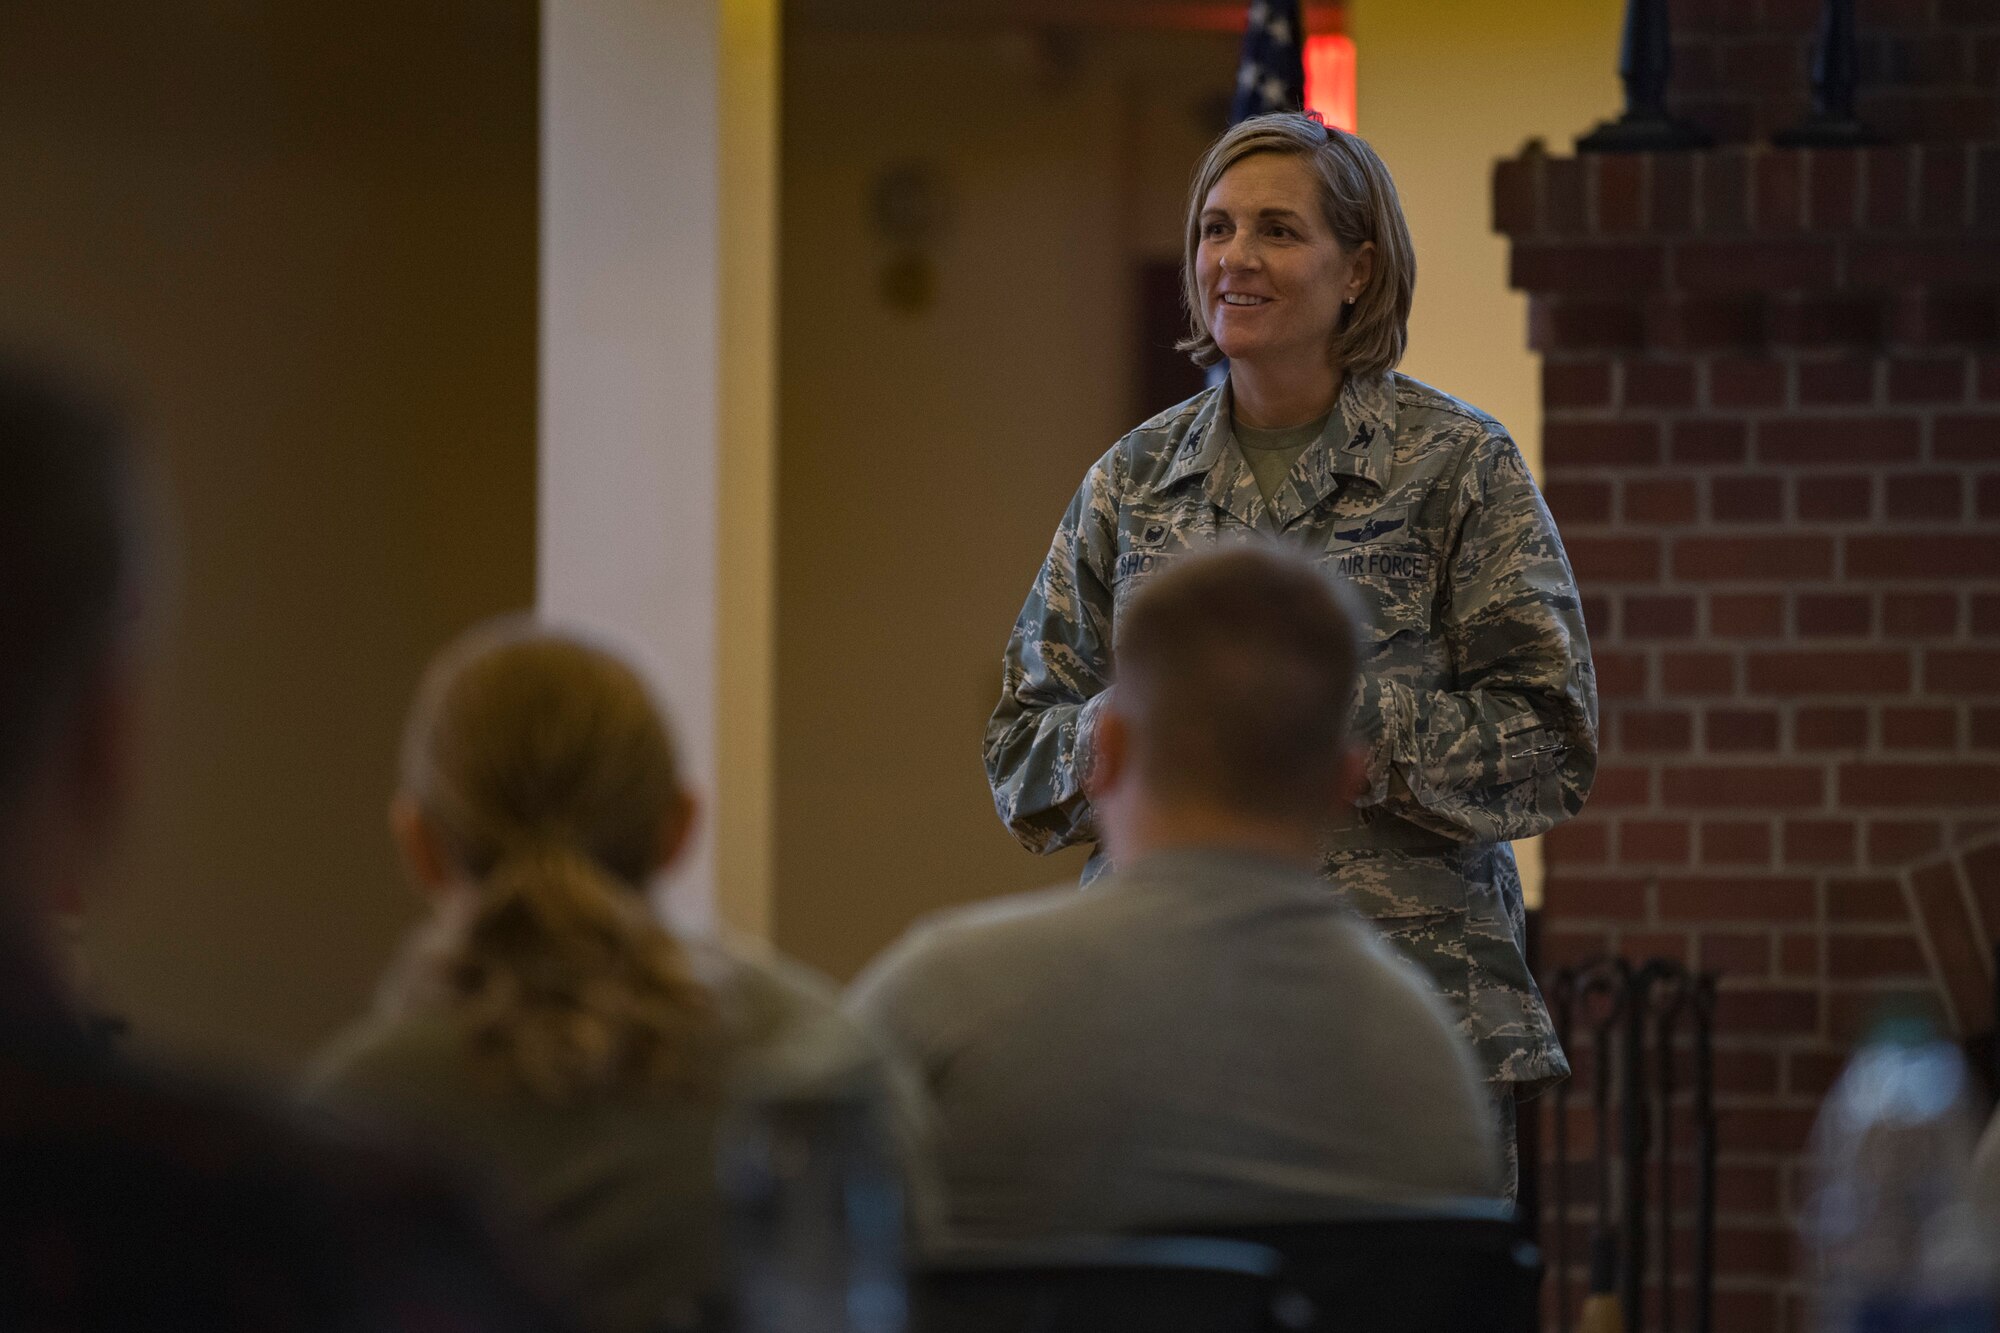 Col. Jennifer Short, 23d Wing commander, addresses a crowd of Emerge Moody and Leadership Moody students during the initial meeting of the 2018 classes, Aug. 18, 2017, at Moody Air Force Base, Ga. The Emerge Moody and Leadership Moody courses are designed to nurture the development of leaders throughout the units stationed at Moody Air Force Base. (U.S. Air Force photo by Airman 1st Class Daniel Snider)